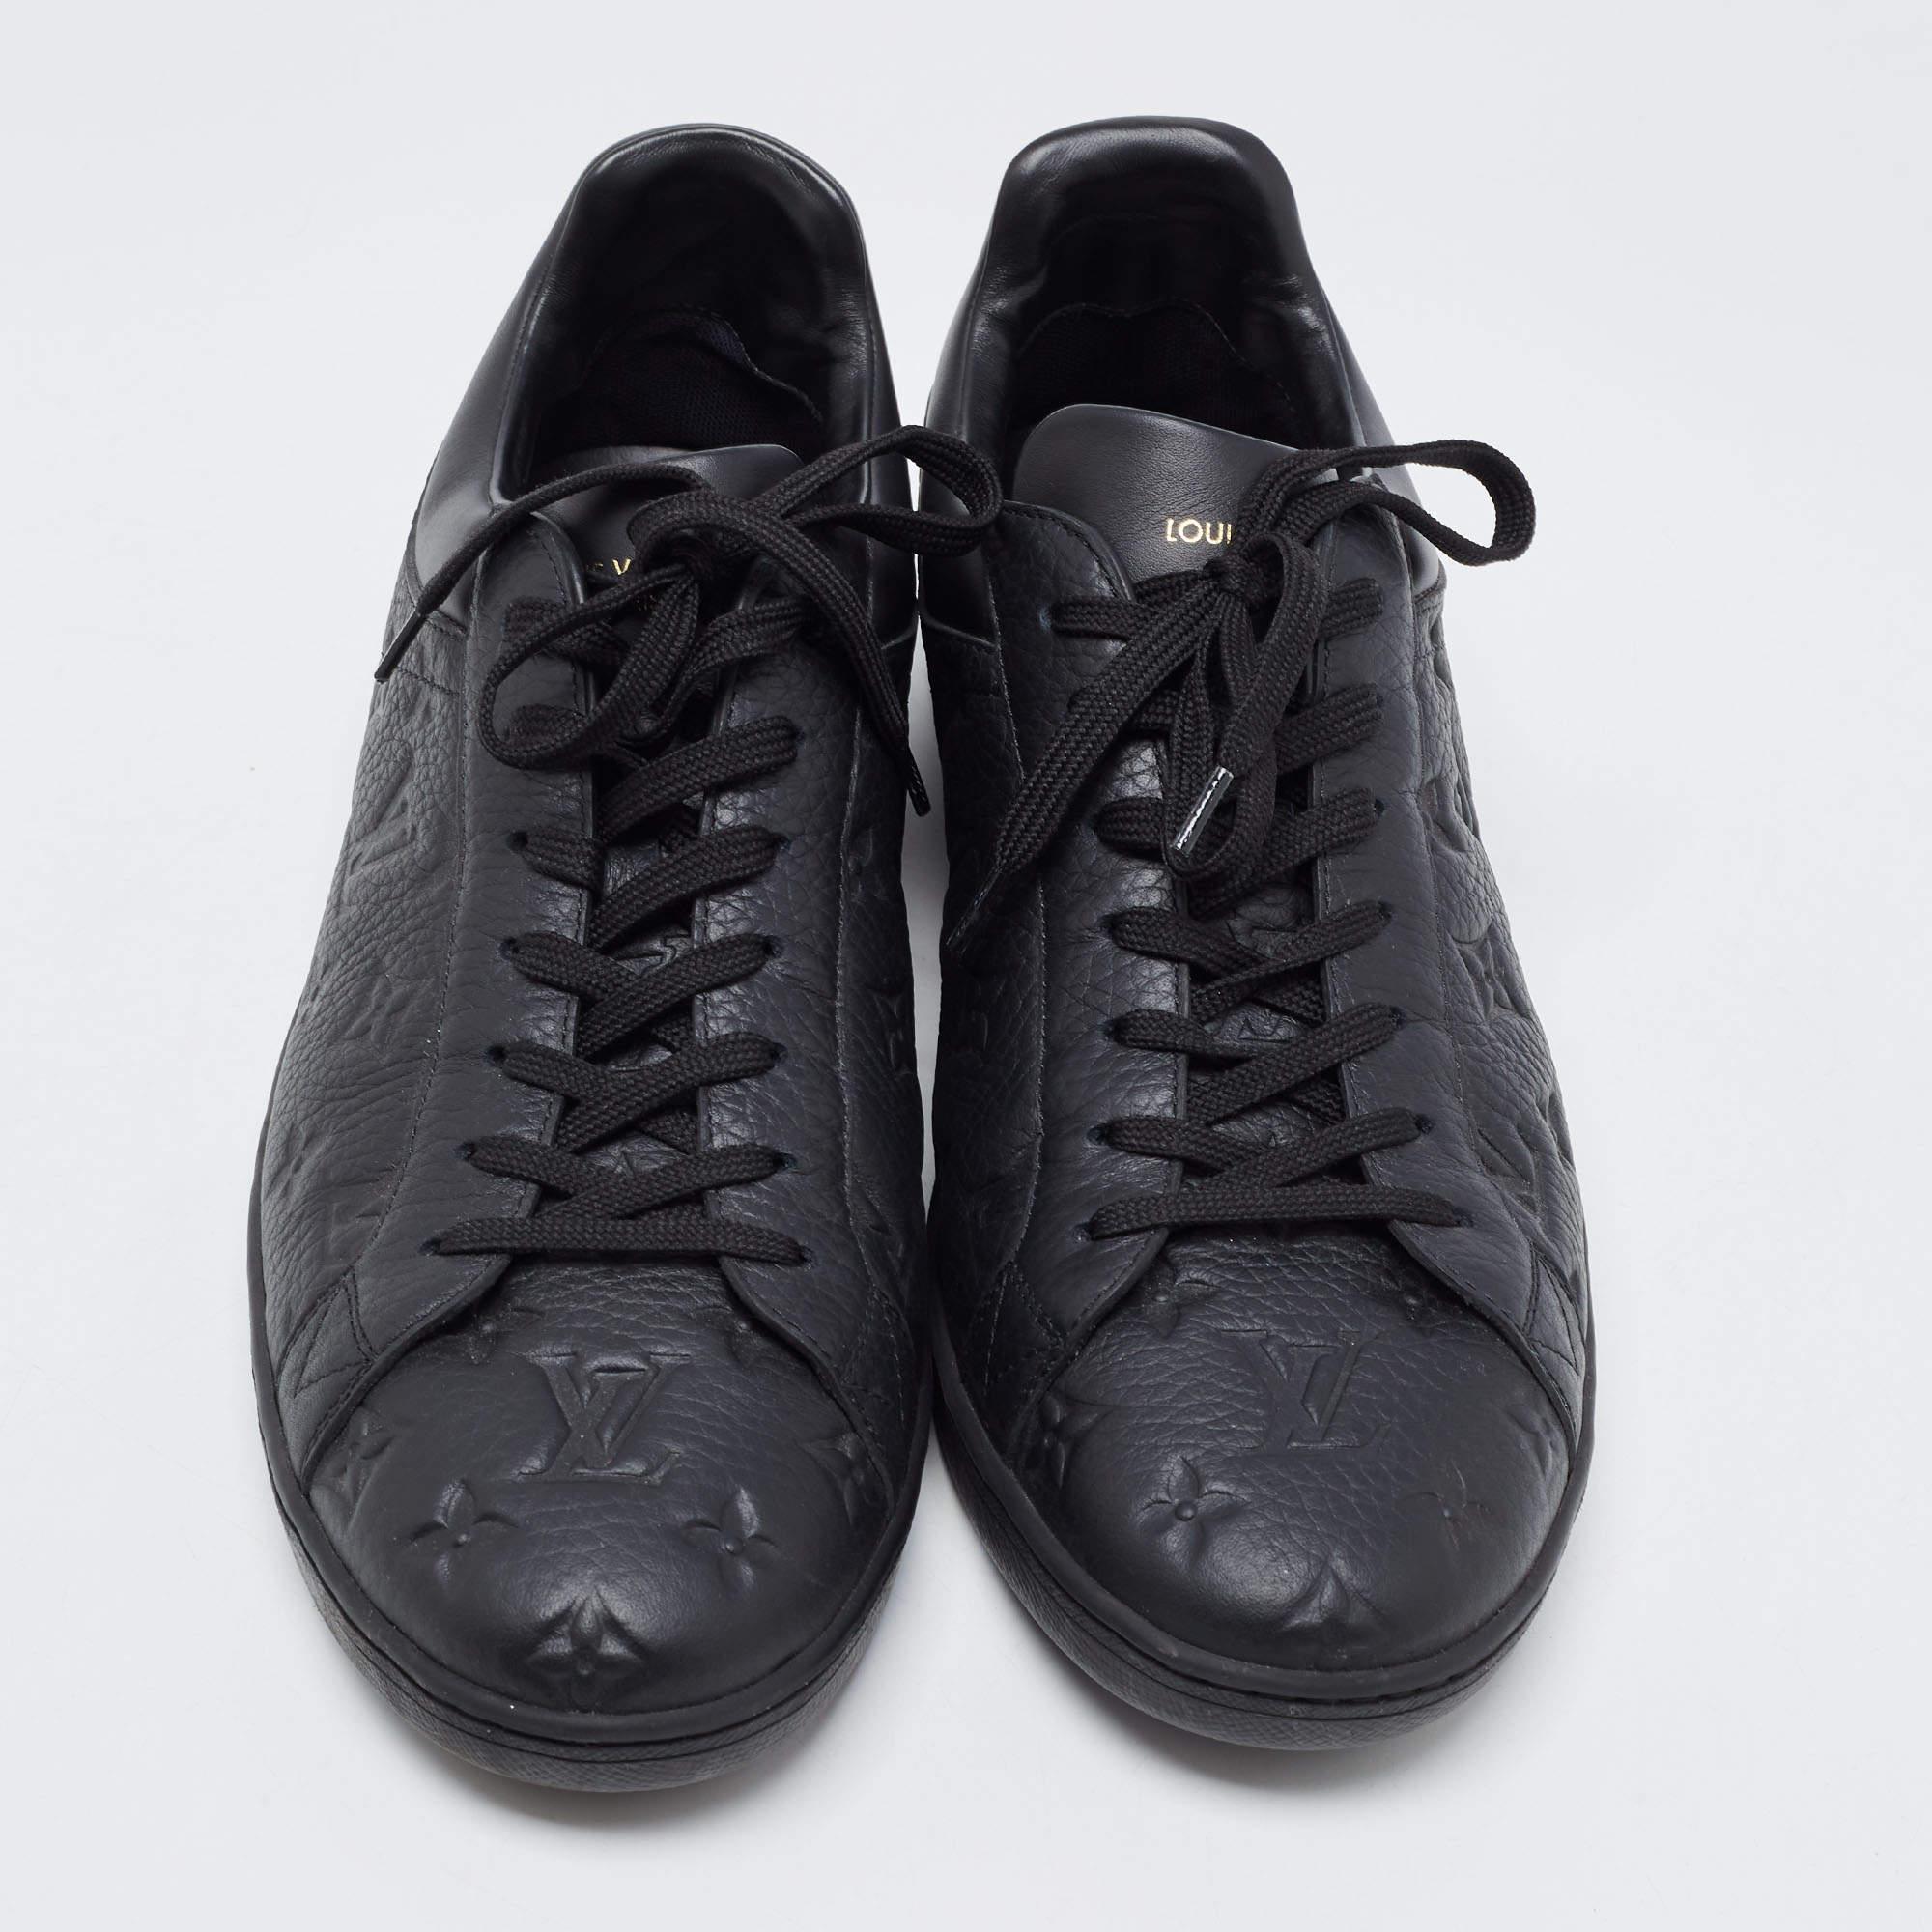 An everyday pair you're going to love is this one by Louis Vuitton. These designer sneakers are sewn in Monogram-embossed leather and secured by lace-ups.

Includes: Original Dustbag

